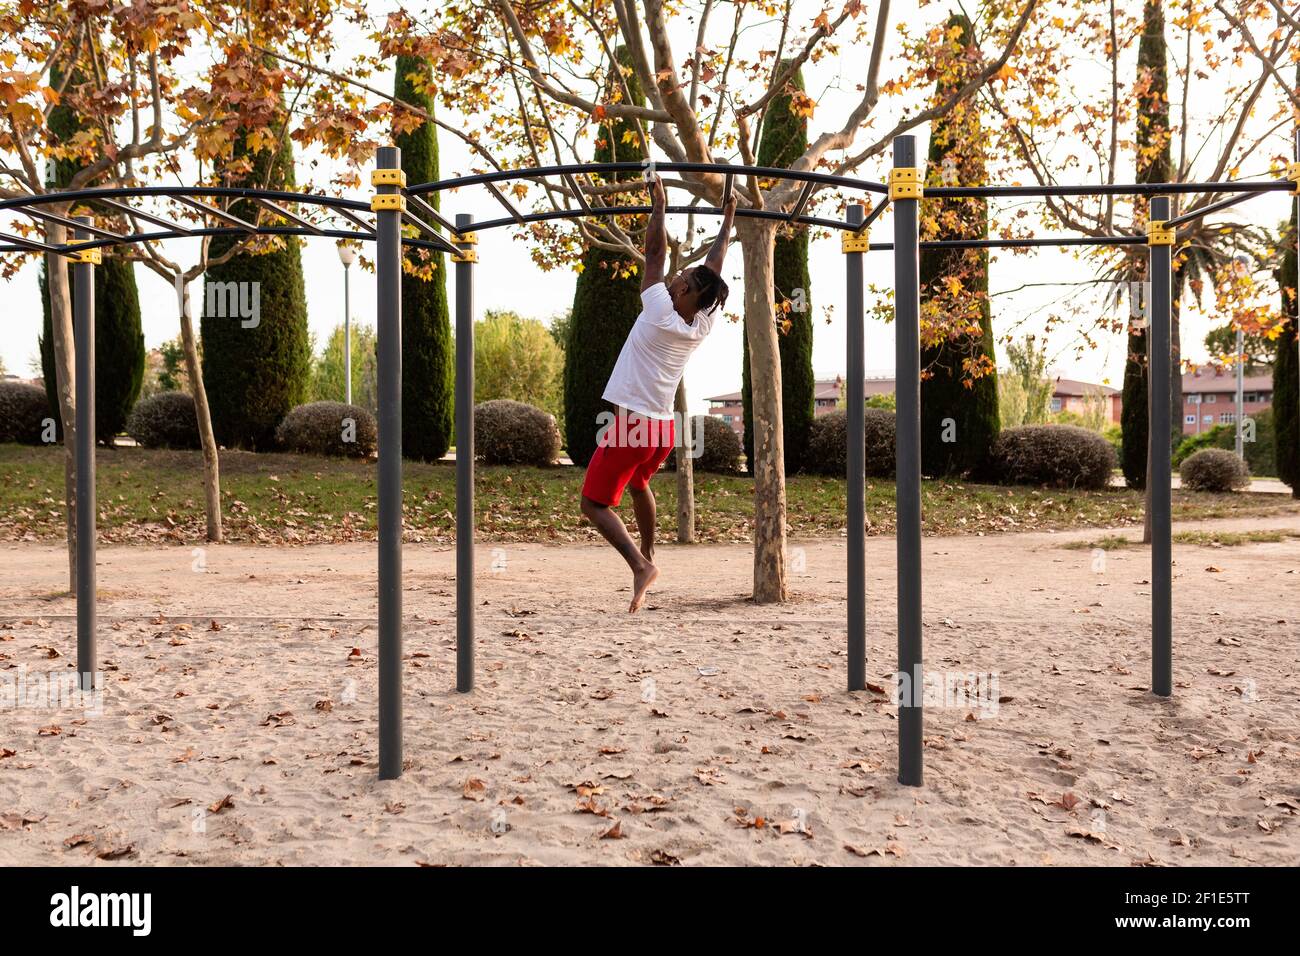 Page 3 - Calisthenics High Resolution Stock Photography and Images - Alamy